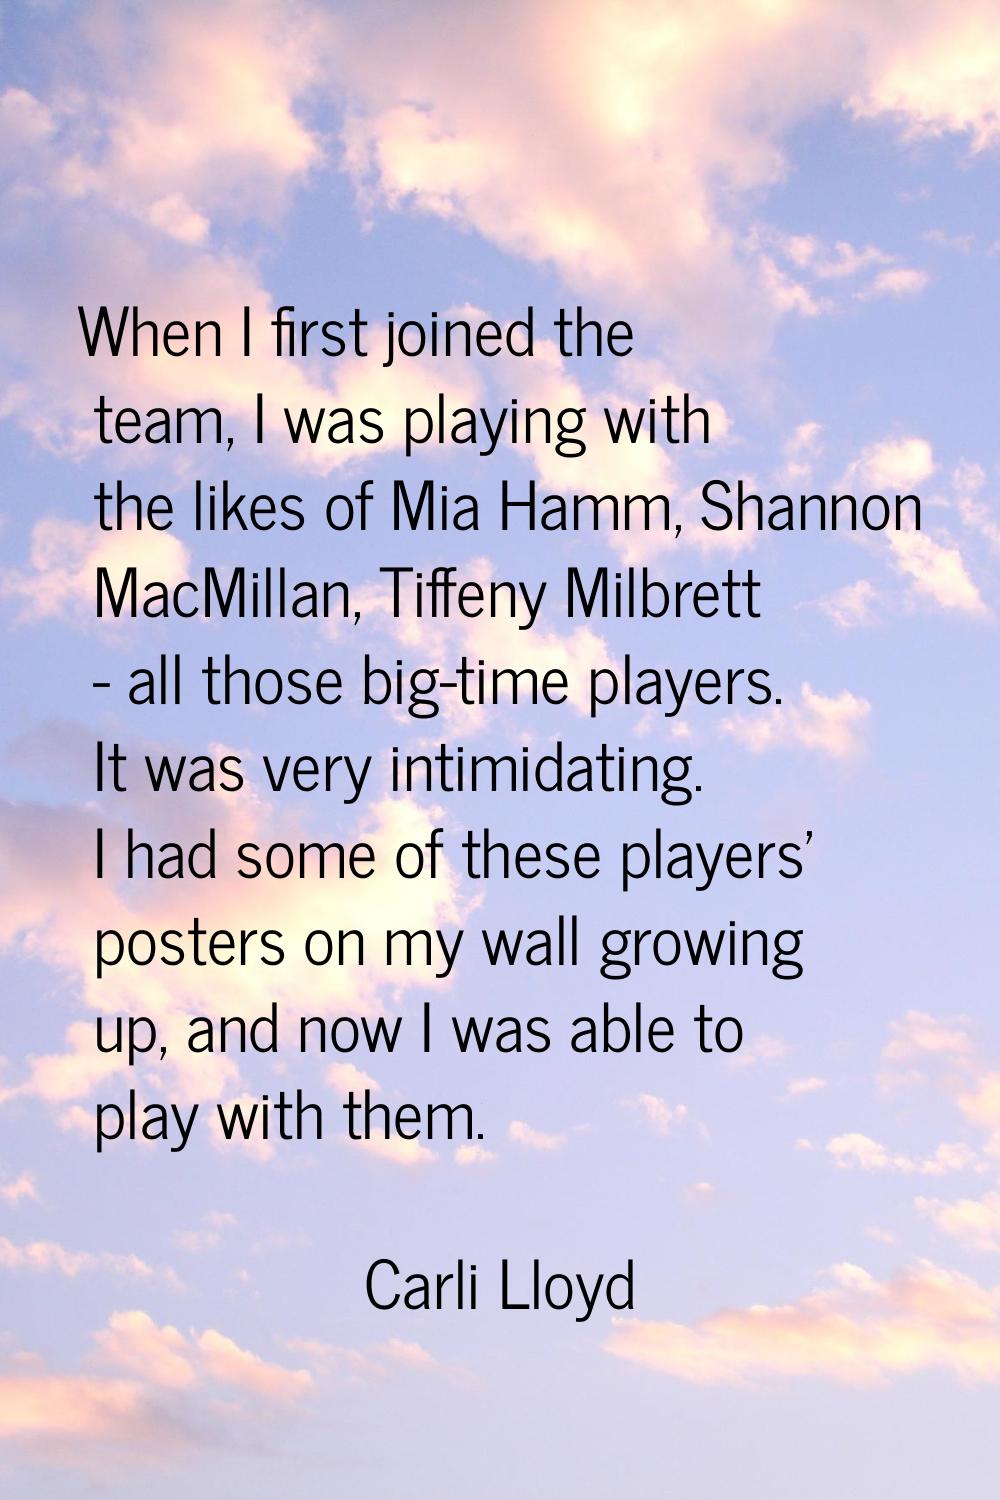 When I first joined the team, I was playing with the likes of Mia Hamm, Shannon MacMillan, Tiffeny 